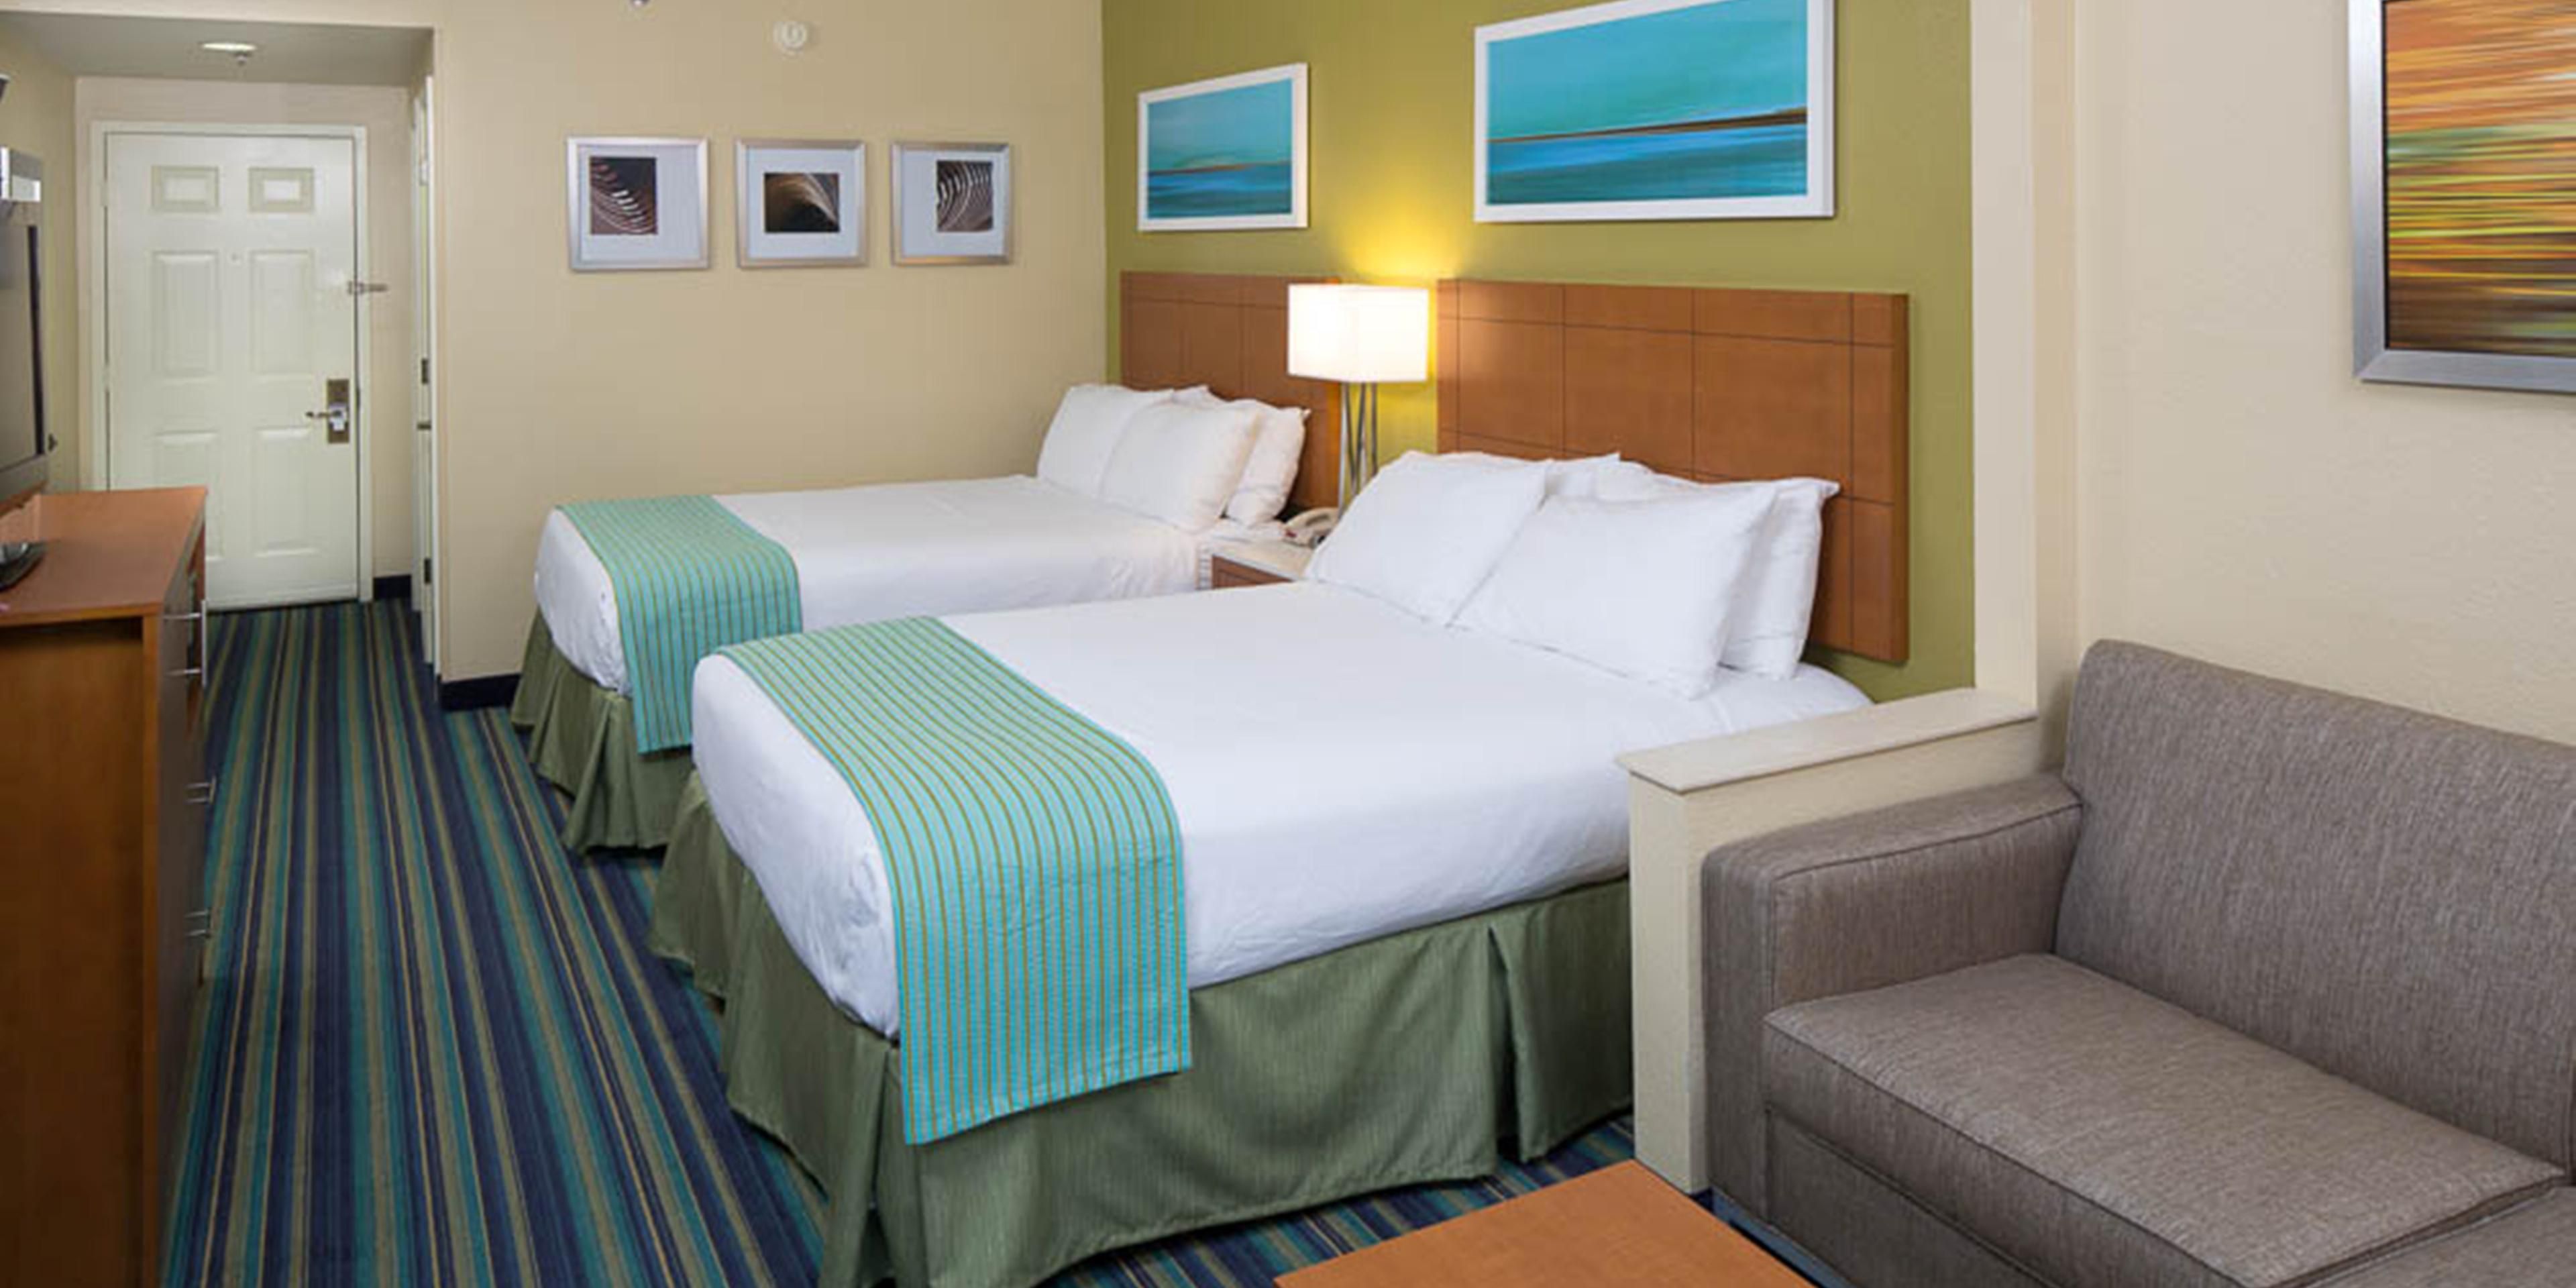 Let your car relax and recharge at our station while you relax in your guestroom. 